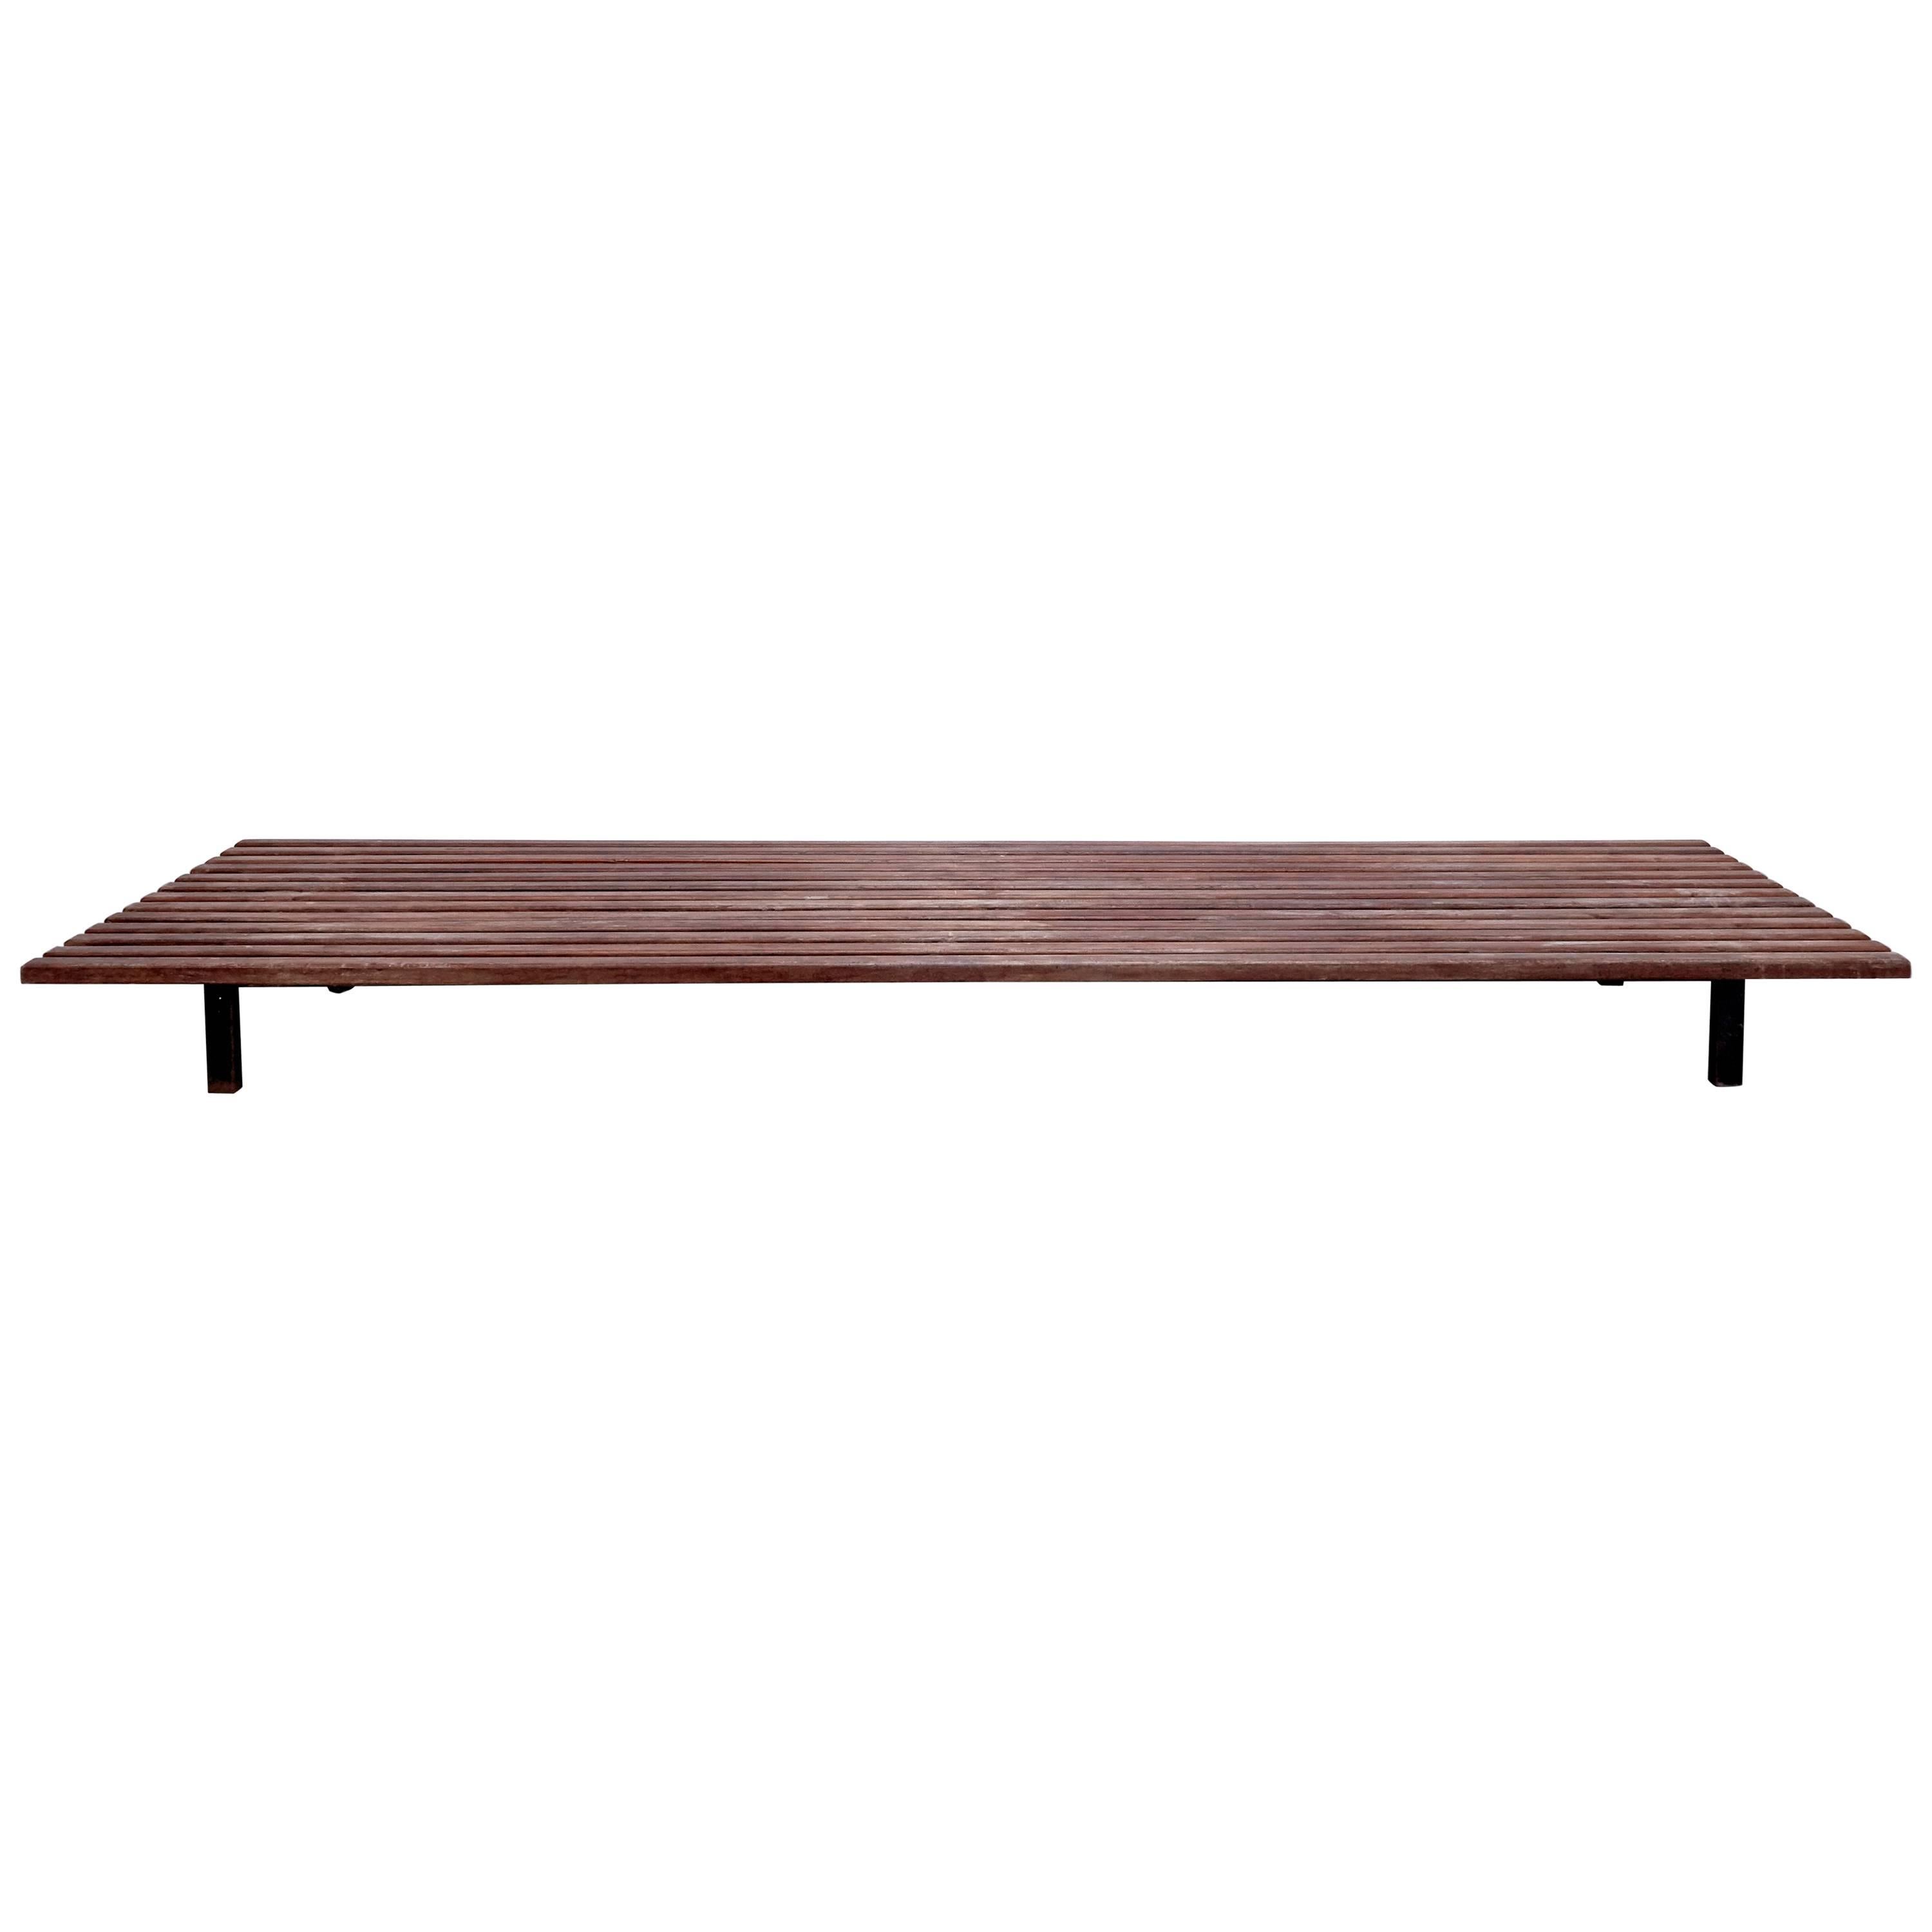 Charlotte Perriand Mid Century Modern Wood And Metal Cansado Bench, circa 1950